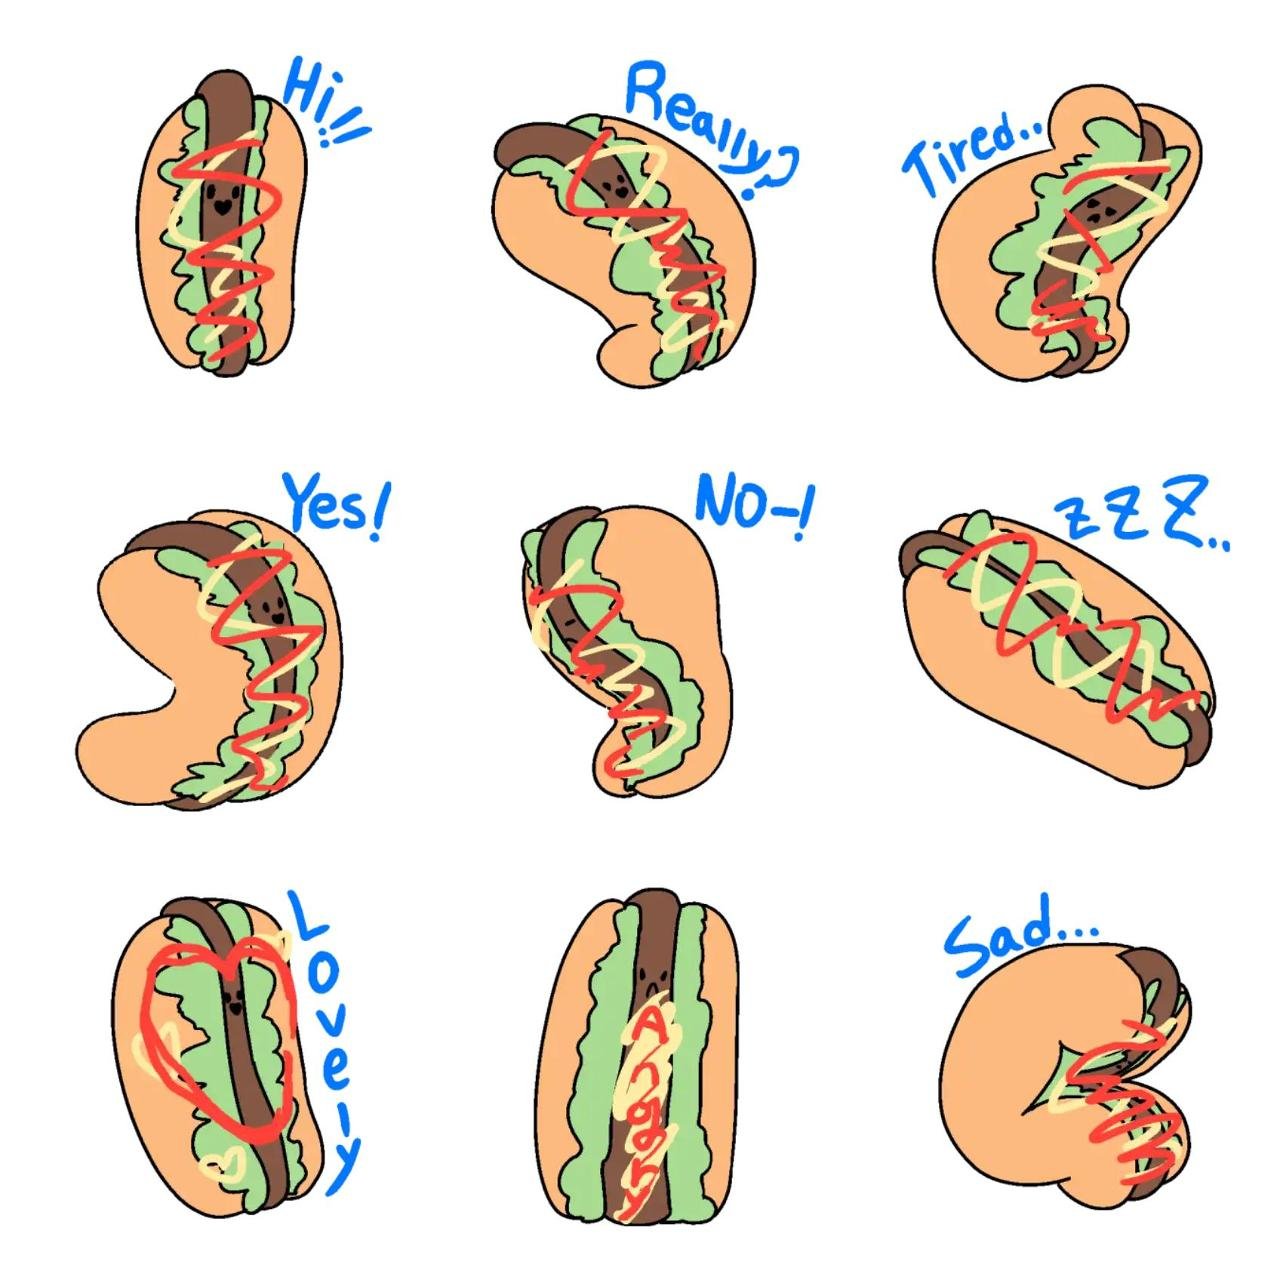 Daily hotdog Animation/Cartoon,Food/Drink sticker pack for Whatsapp, Telegram, Signal, and others chatting and message apps